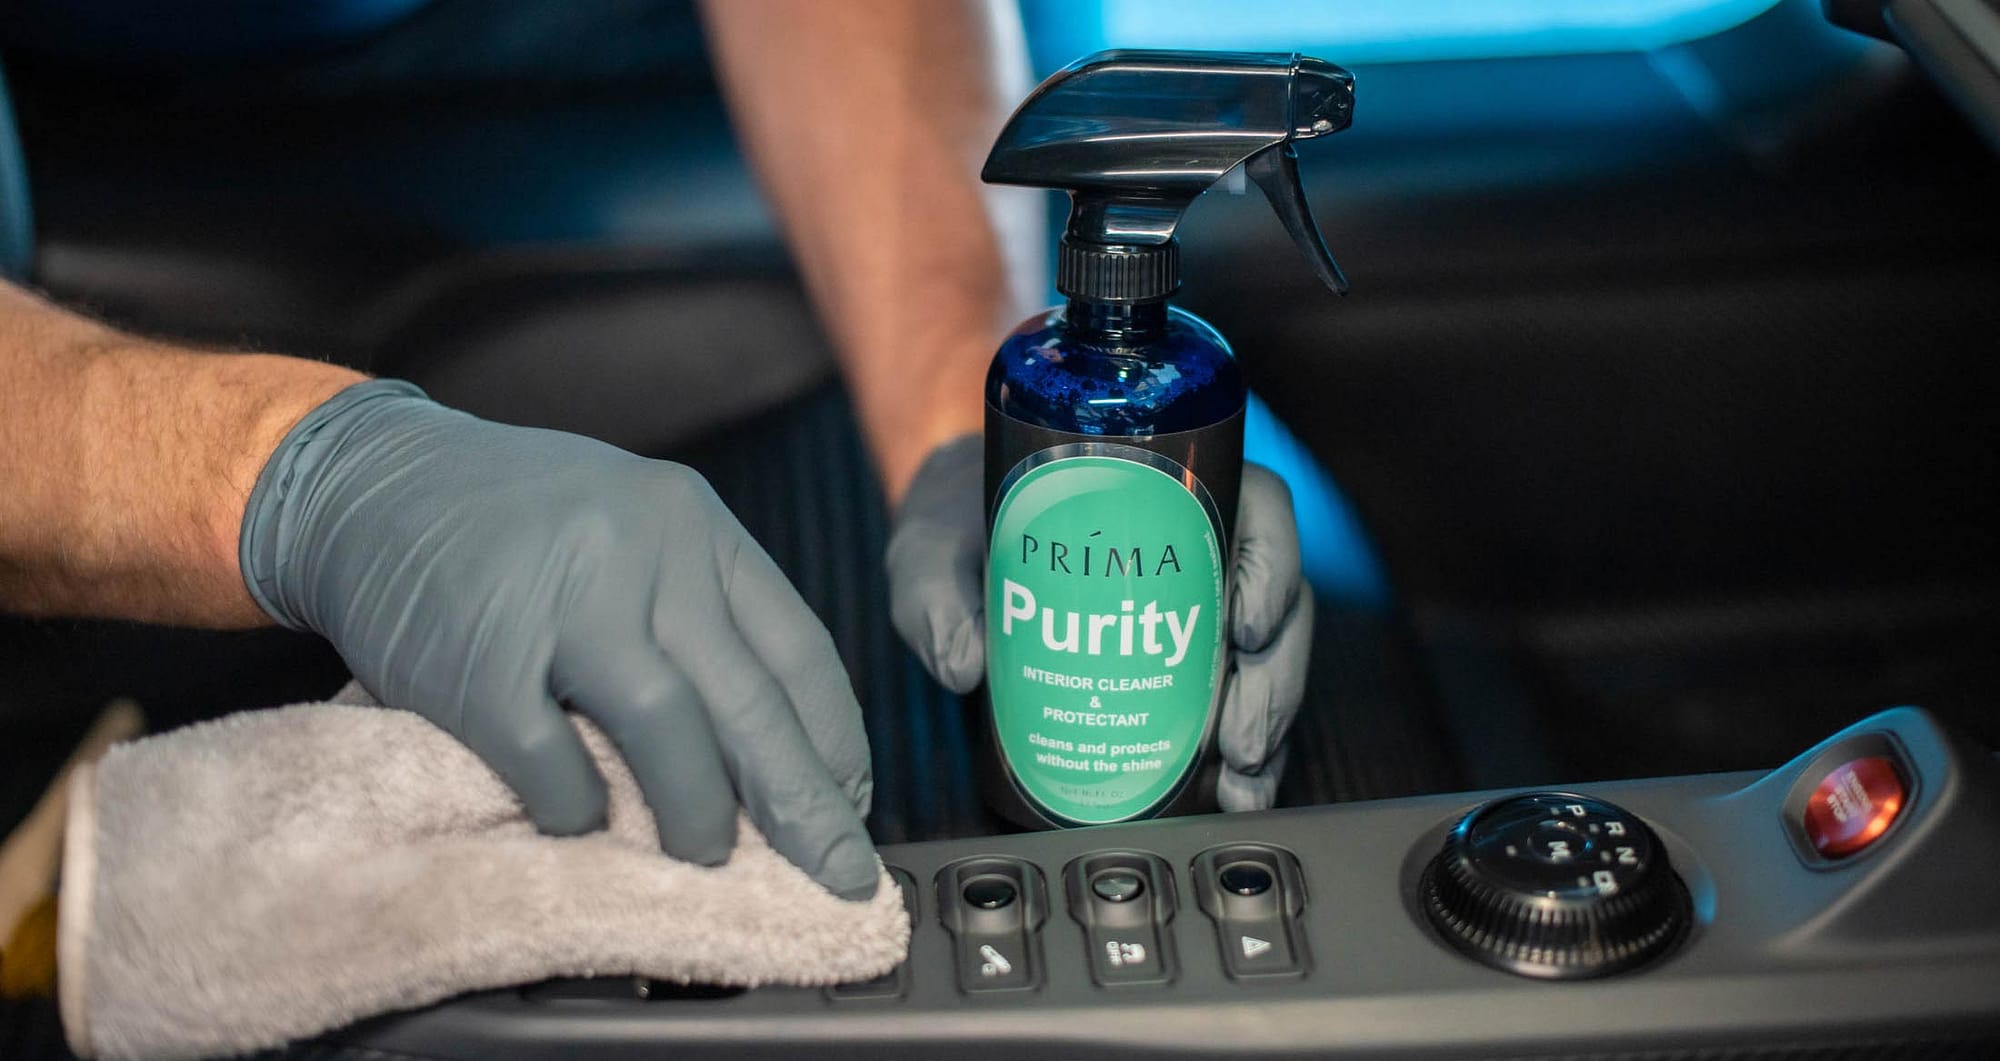 A bottle of Prima Purity interior cleaner and a man polishing a dashboard.